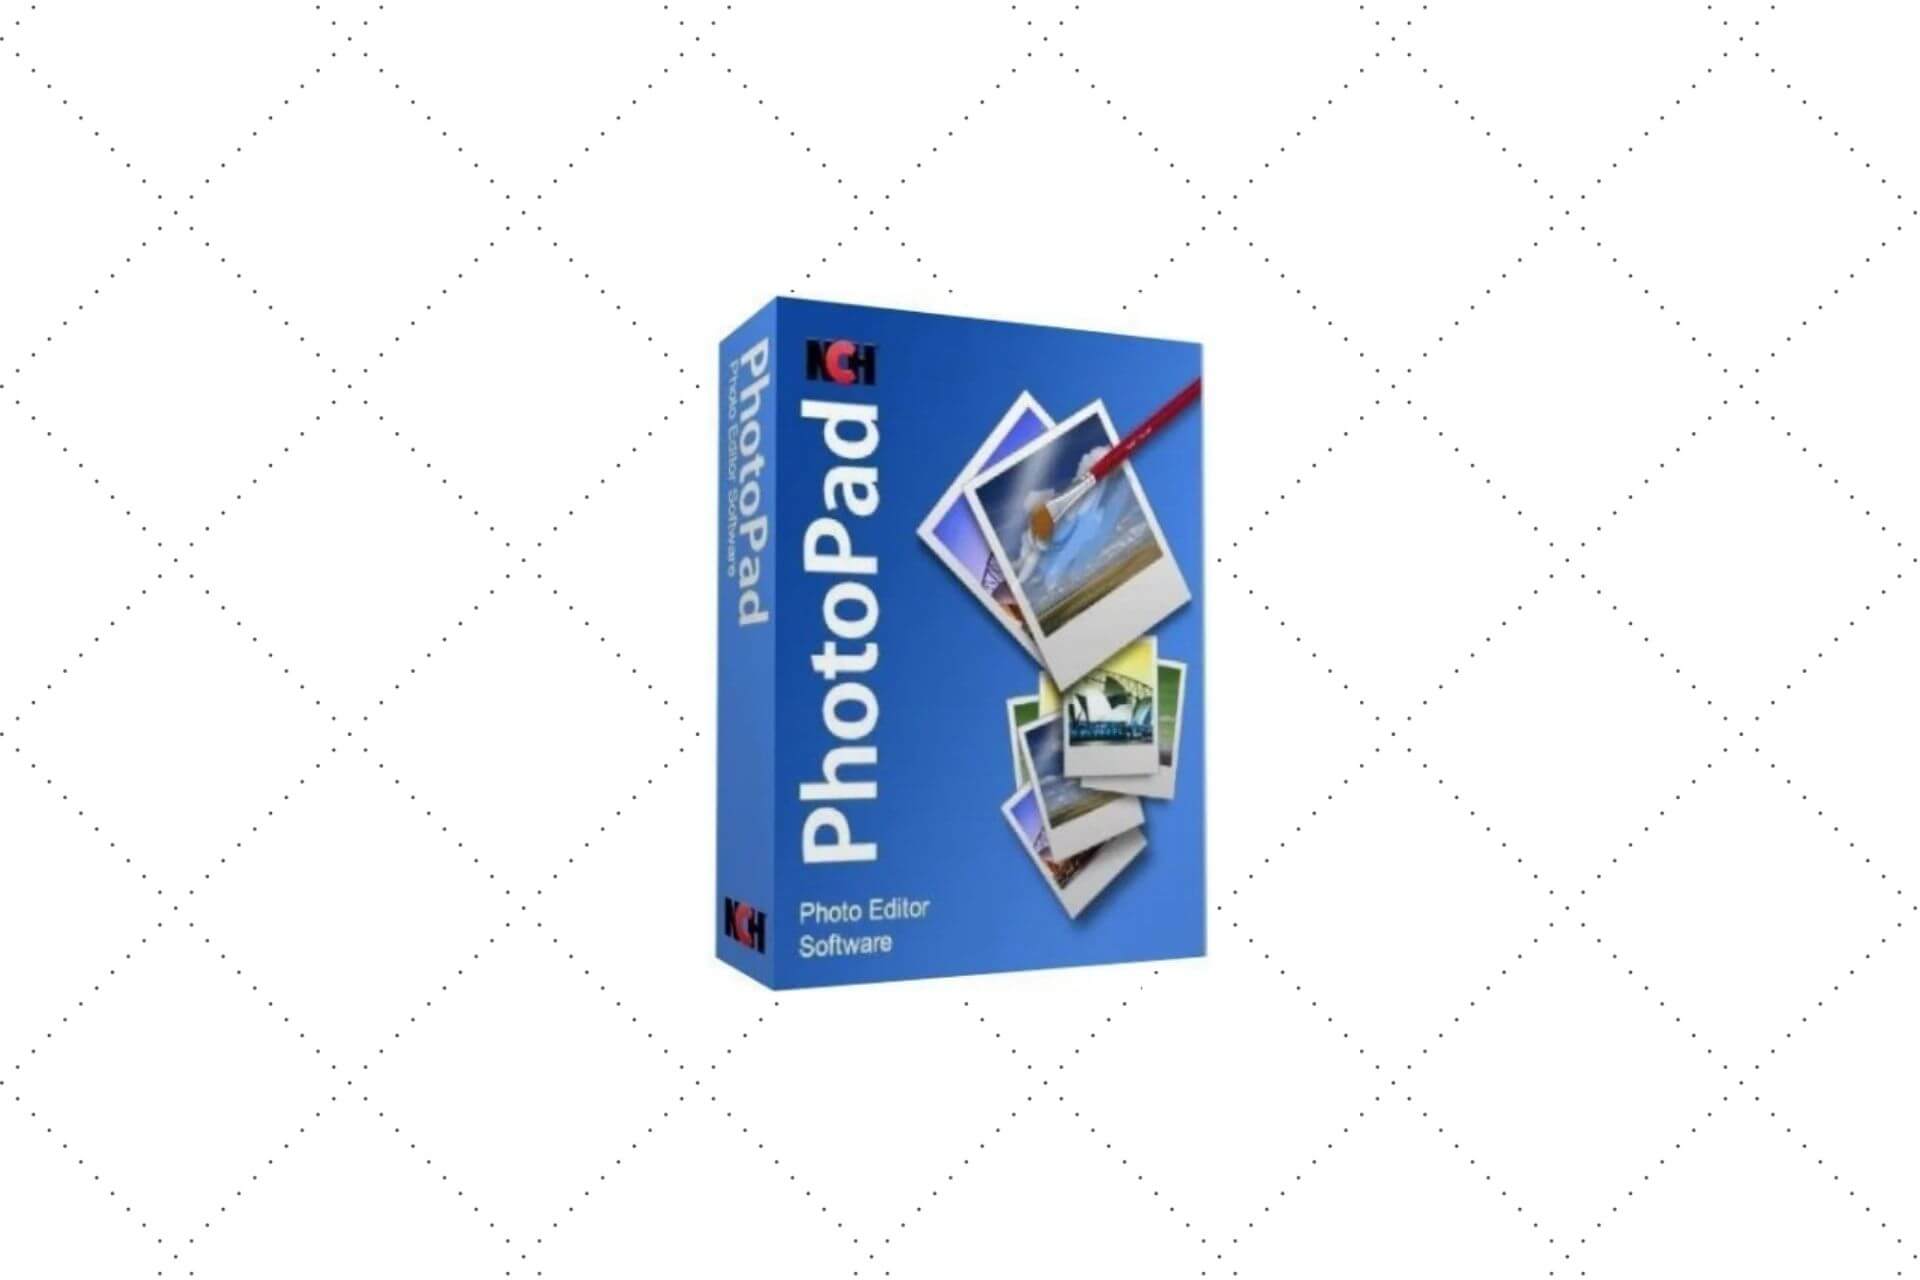 download the last version for ios NCH PhotoPad Image Editor 11.51